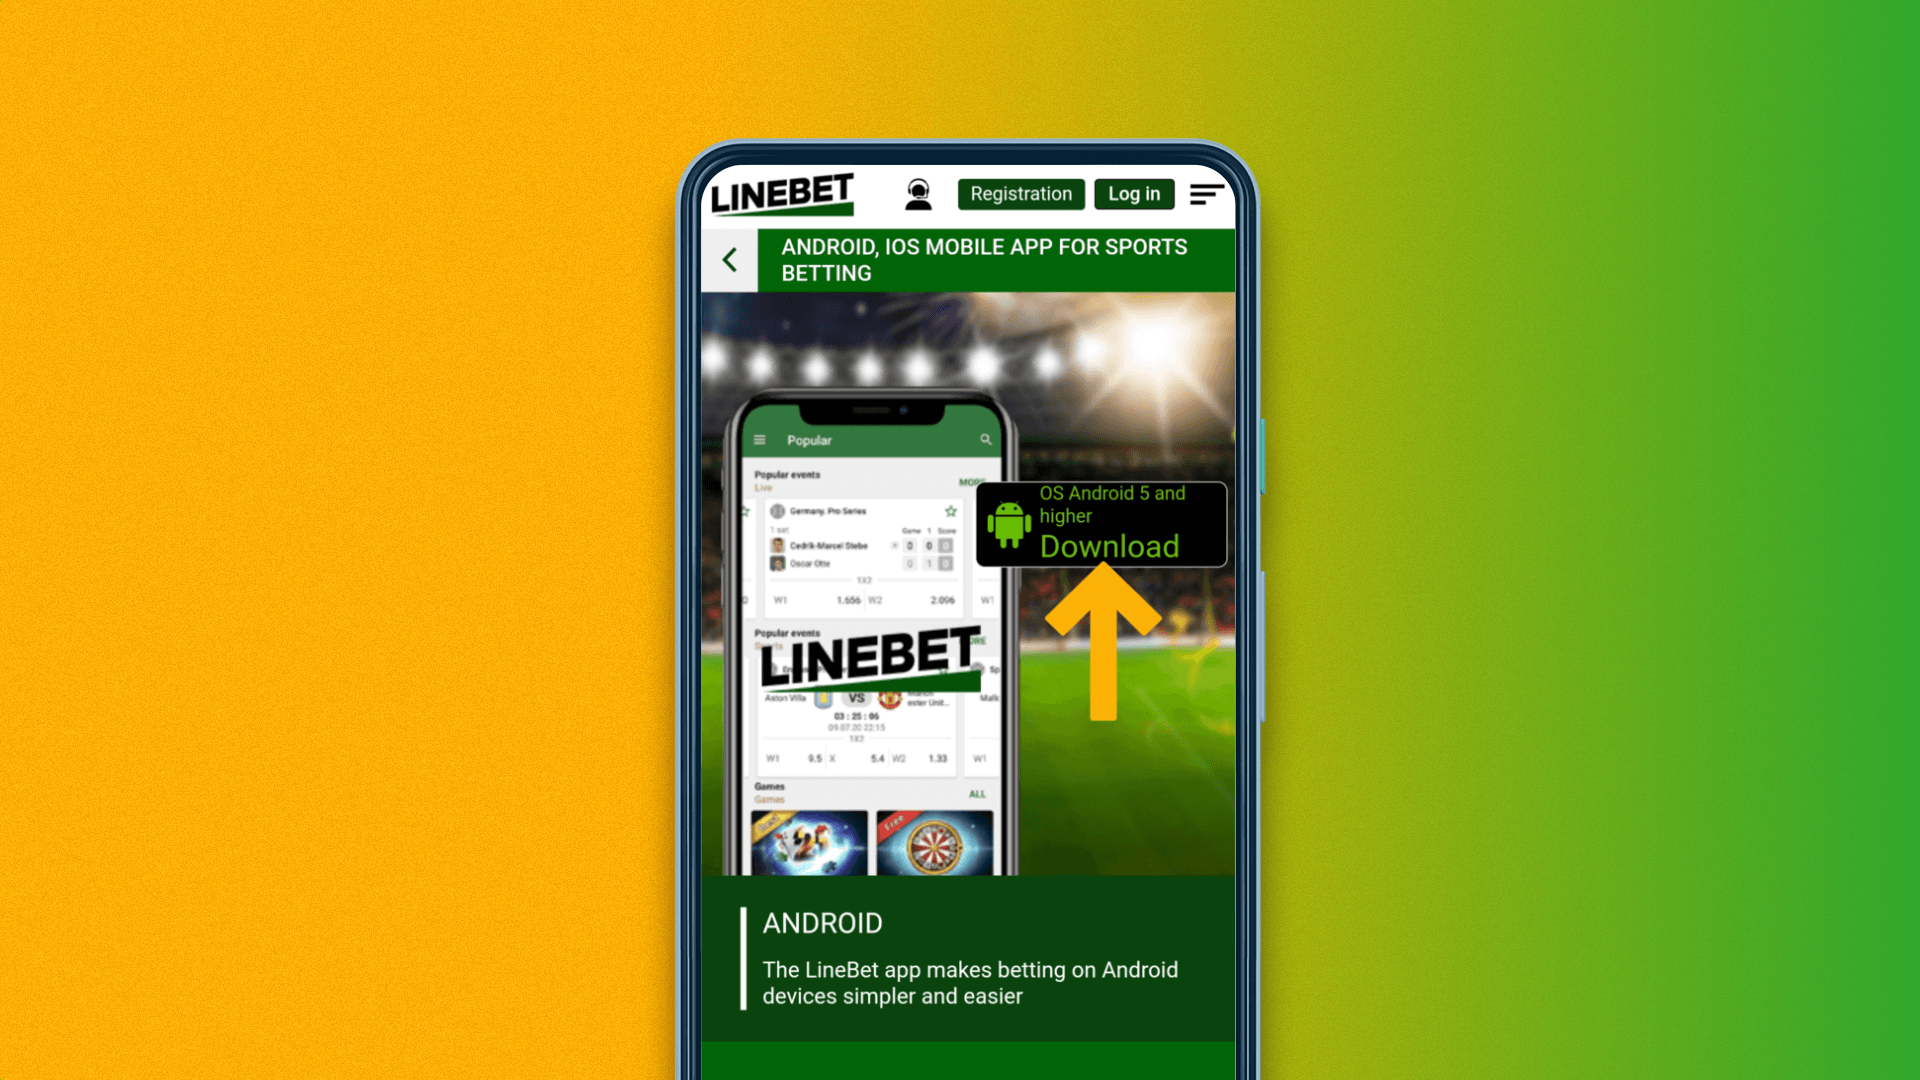 Linebet website page, where can download the mobile app for Android